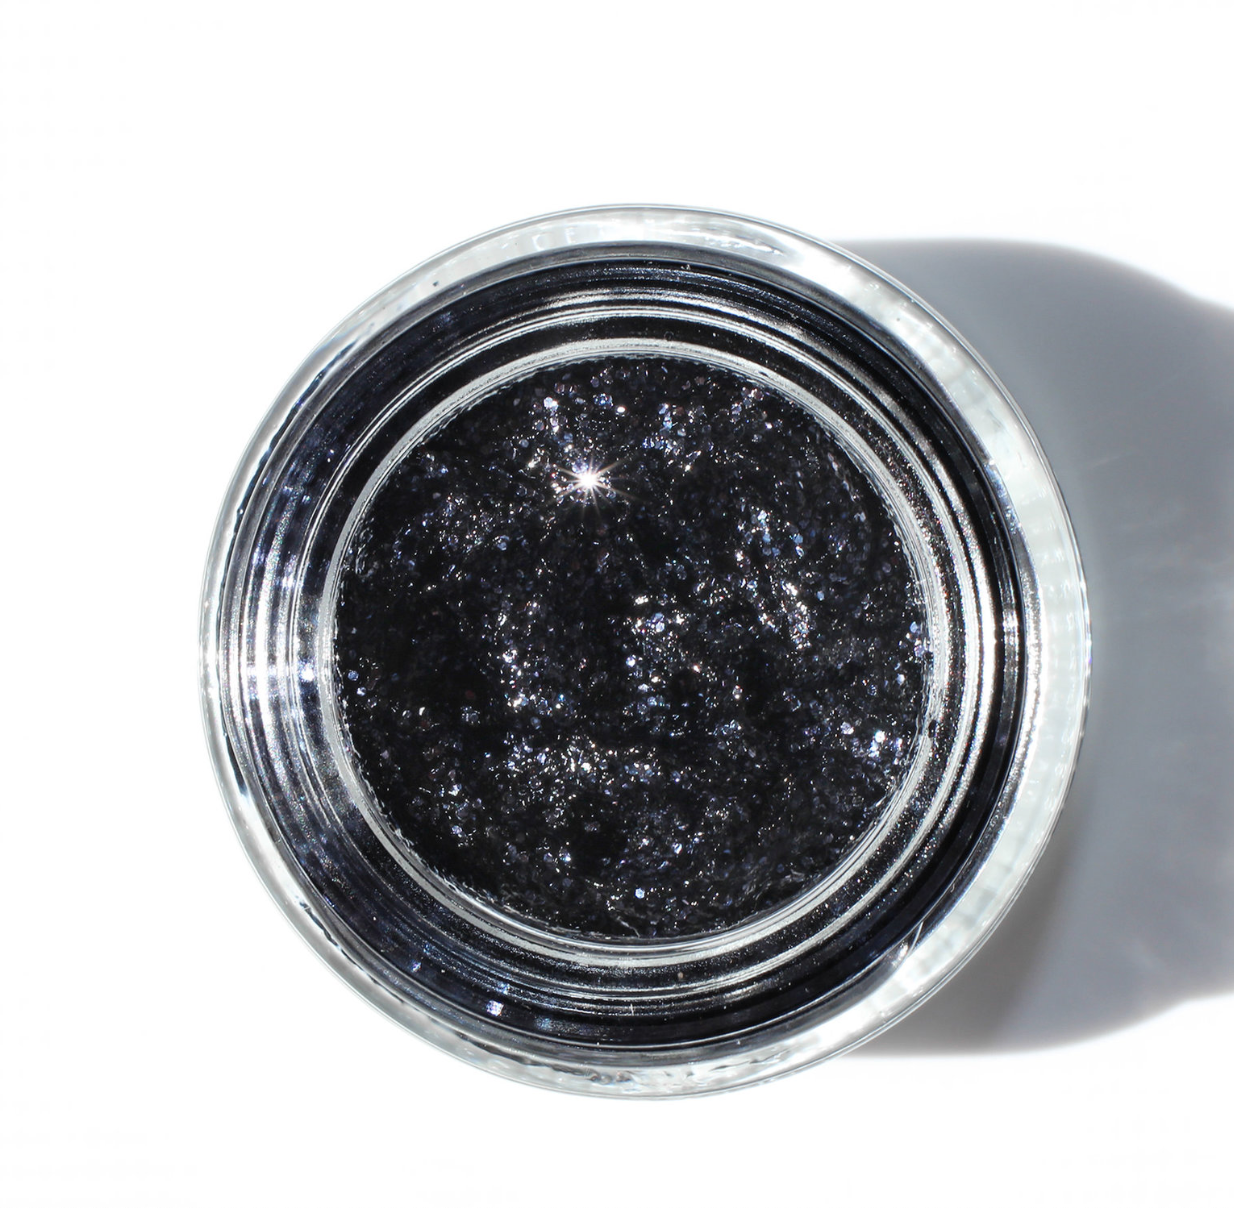 8 New Glitter Eye Shadows To Try Just In Time For New Year's Eve